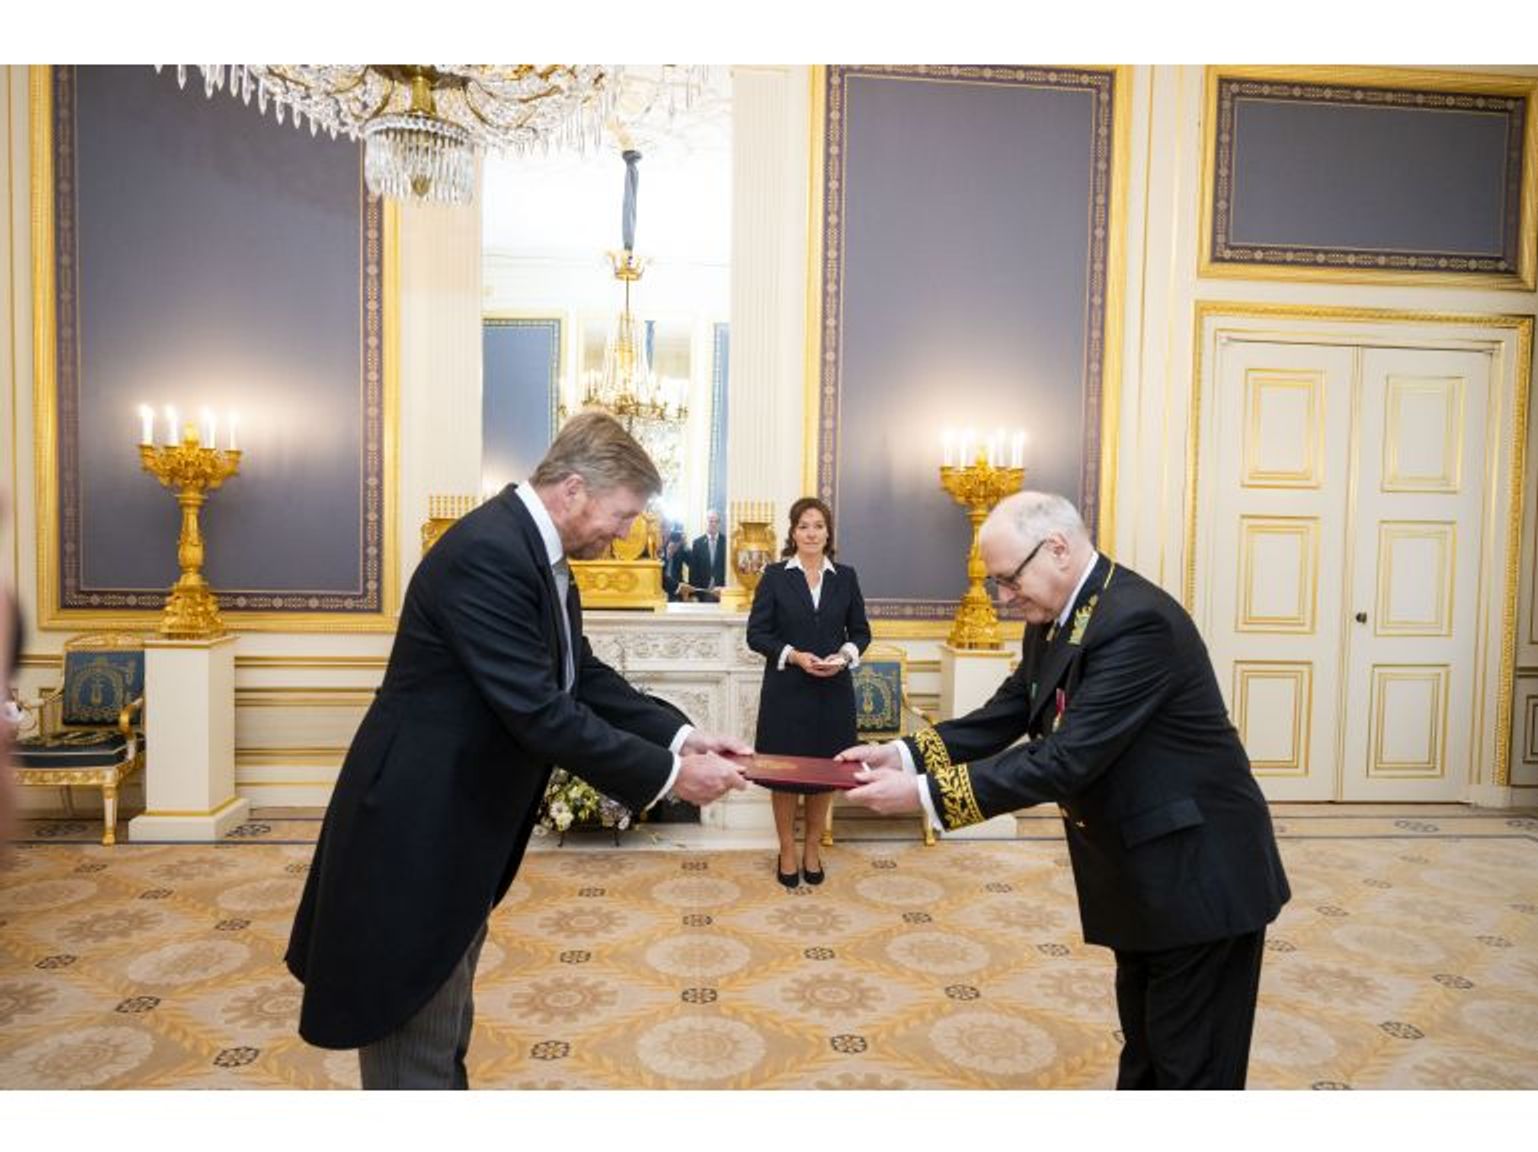 Russian Ambassador Extraordinary and Plenipotentiary Vladimir Tarabrin presenting King Willem-Alexander of The Netherlands with a letter of credence